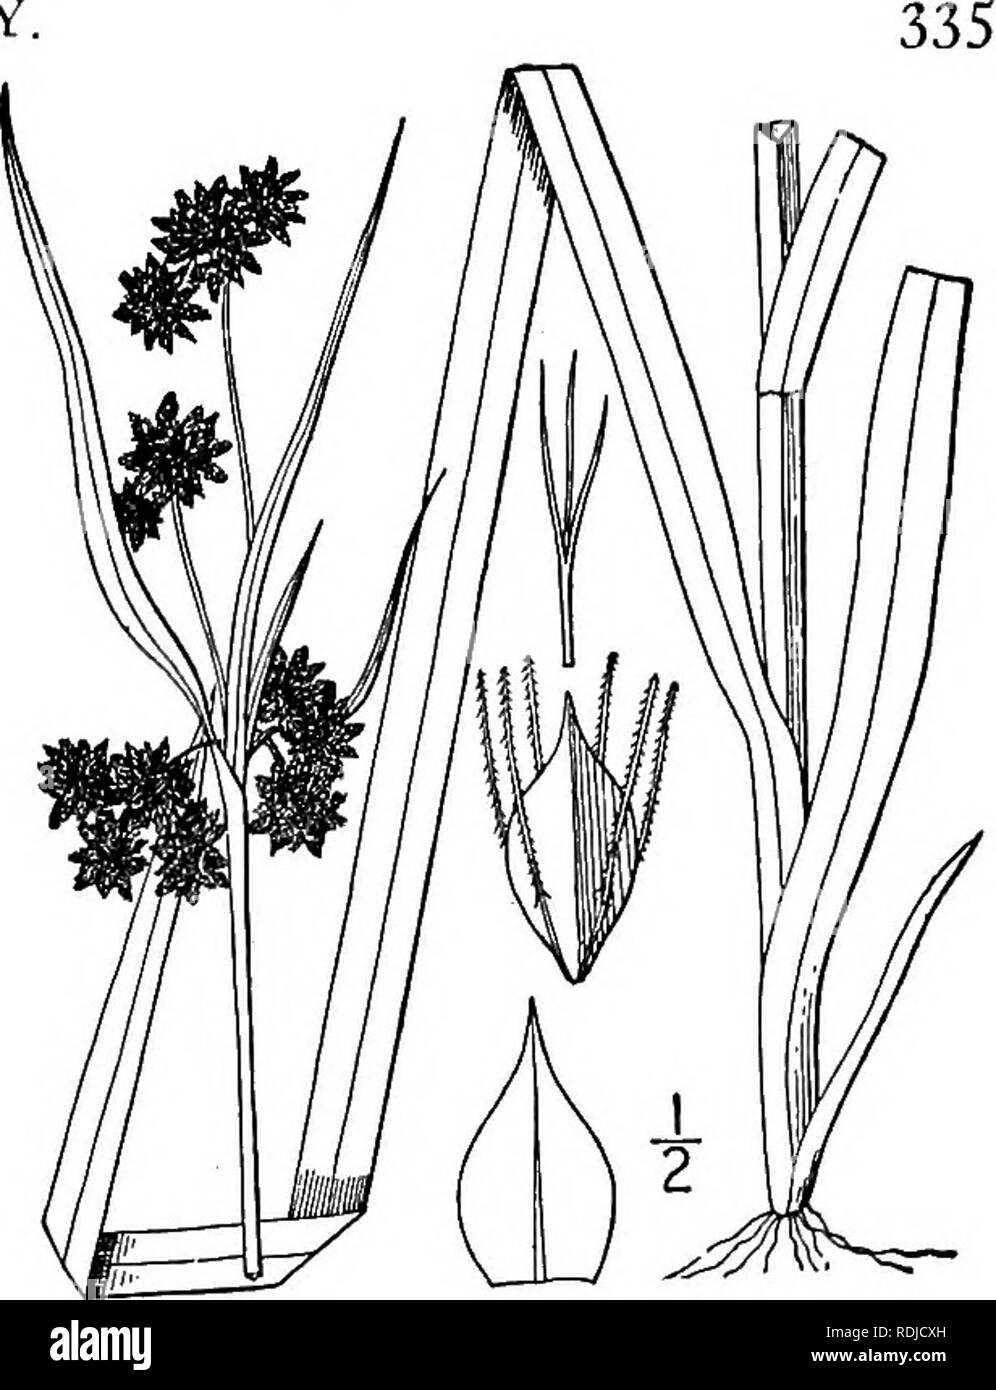 . An illustrated flora of the northern United States, Canada and the British possessions, from Newfoundland to the parallel of the southern boundary of Virginia, and from the Atlantic Ocean westward to the 102d meridian. Botany; Botany. Genus 7. SEDGE FAMILY 24. Scirpus atrovirens Muhl. Dark-green Bulrush. Fig. 824. Scirpus atrovirens Muhl. Gram. 43. 1817. S. georgianus Harper, Bull. Torr. Club 27: 331. 1900. Perennial by slender rootstocks; culms triangular, rather slender, leafy, 2°-4i° high. Leaves elongated, more or less nodulose, rough on the margins, dark green, 3&quot;-6&quot; wide, one Stock Photo